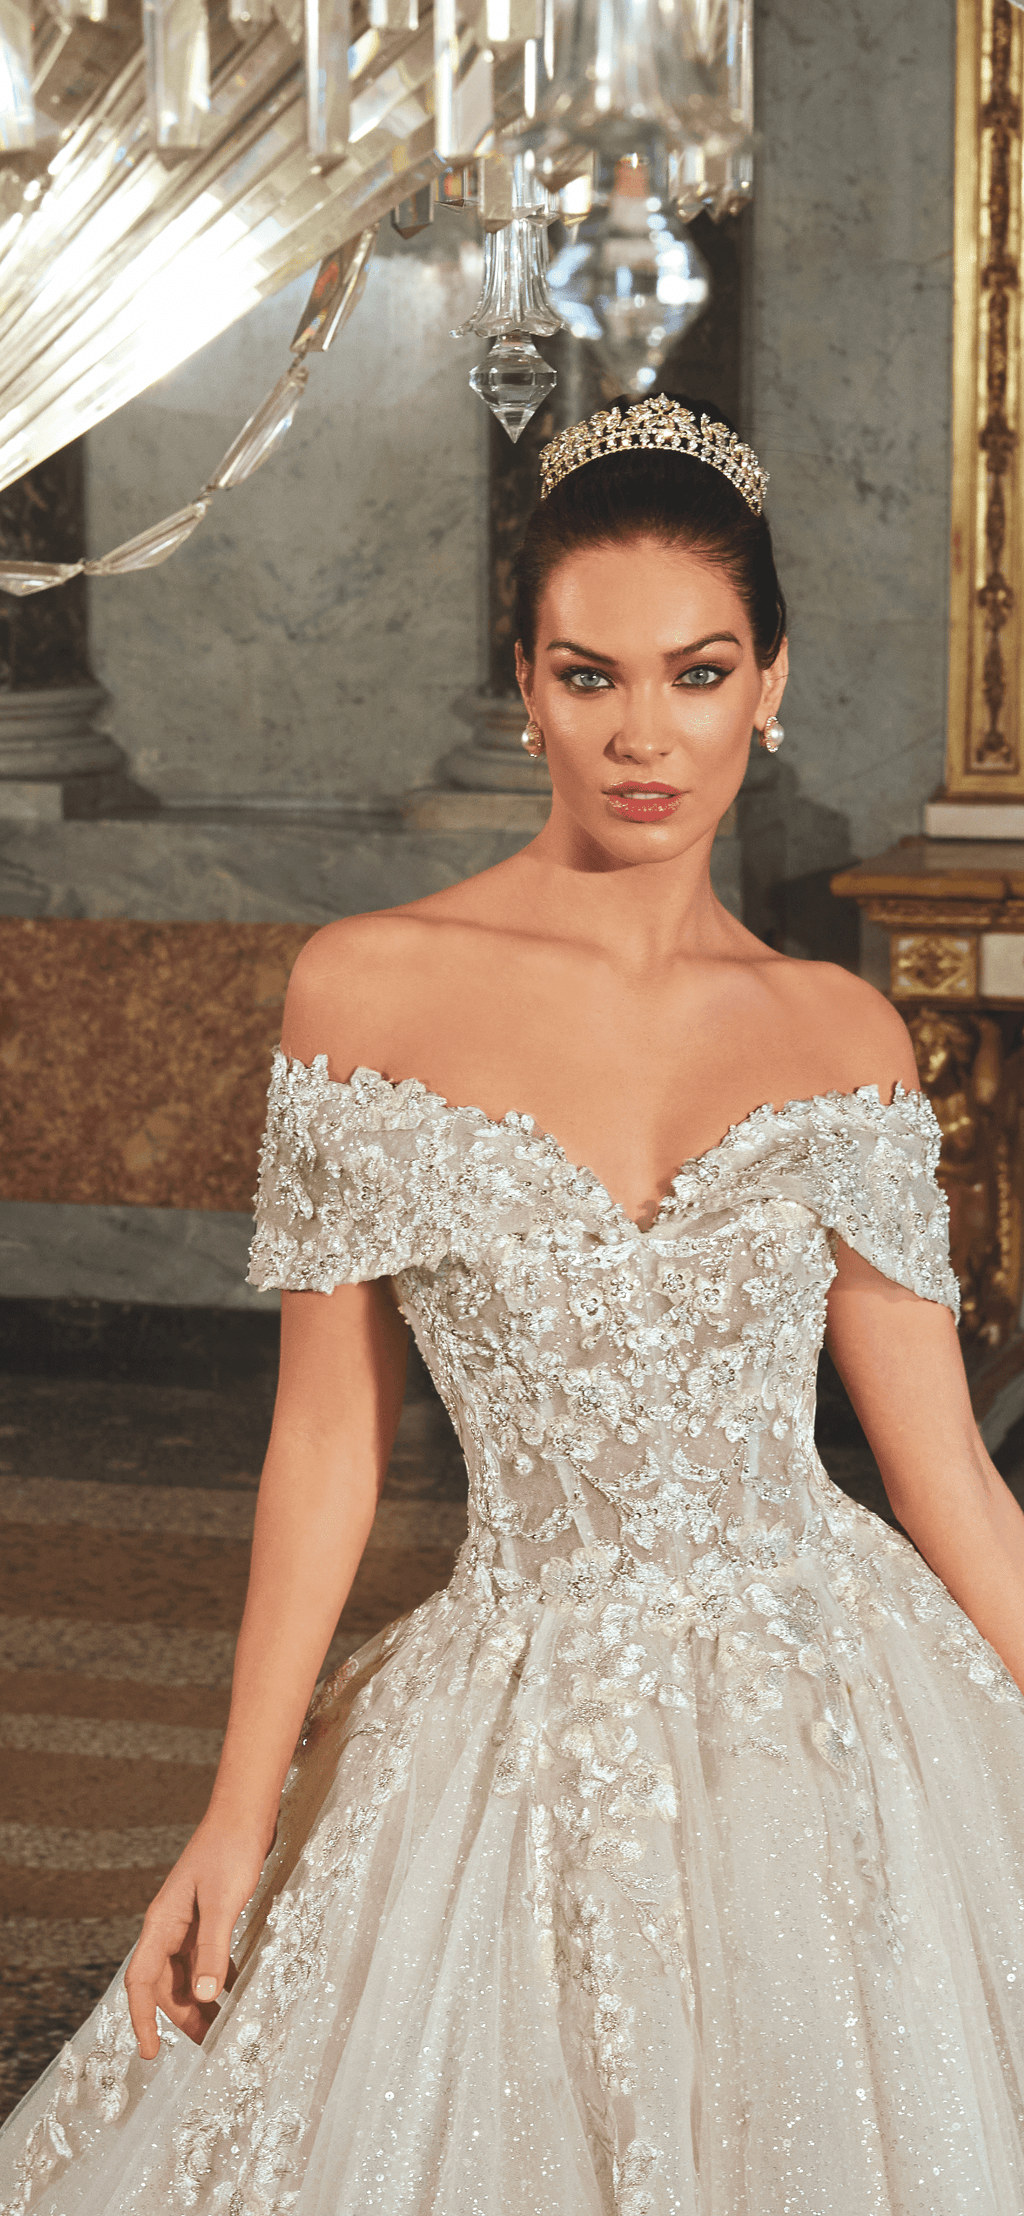 AdeOla Dress | Try at Home Wedding Dresses - Grace + Ivory